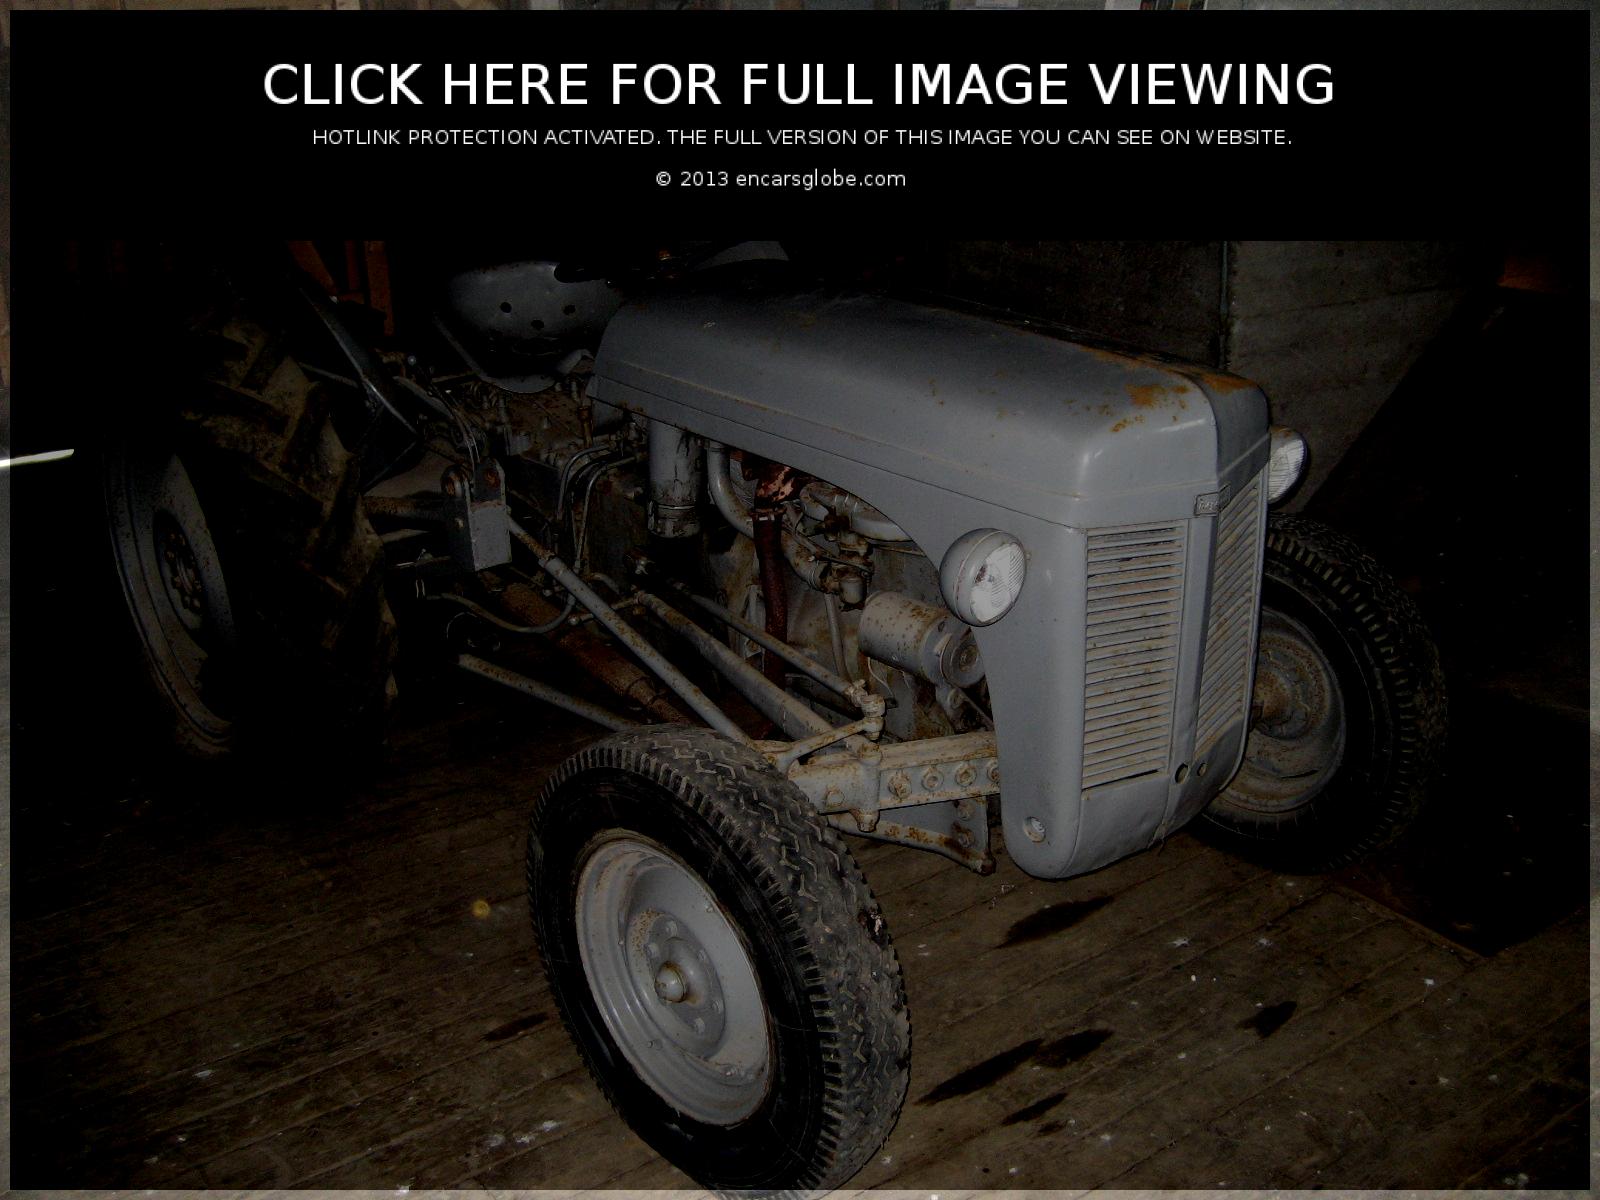 Ferguson TE20 Standard Photo Gallery: Photo #08 out of 10, Image ...